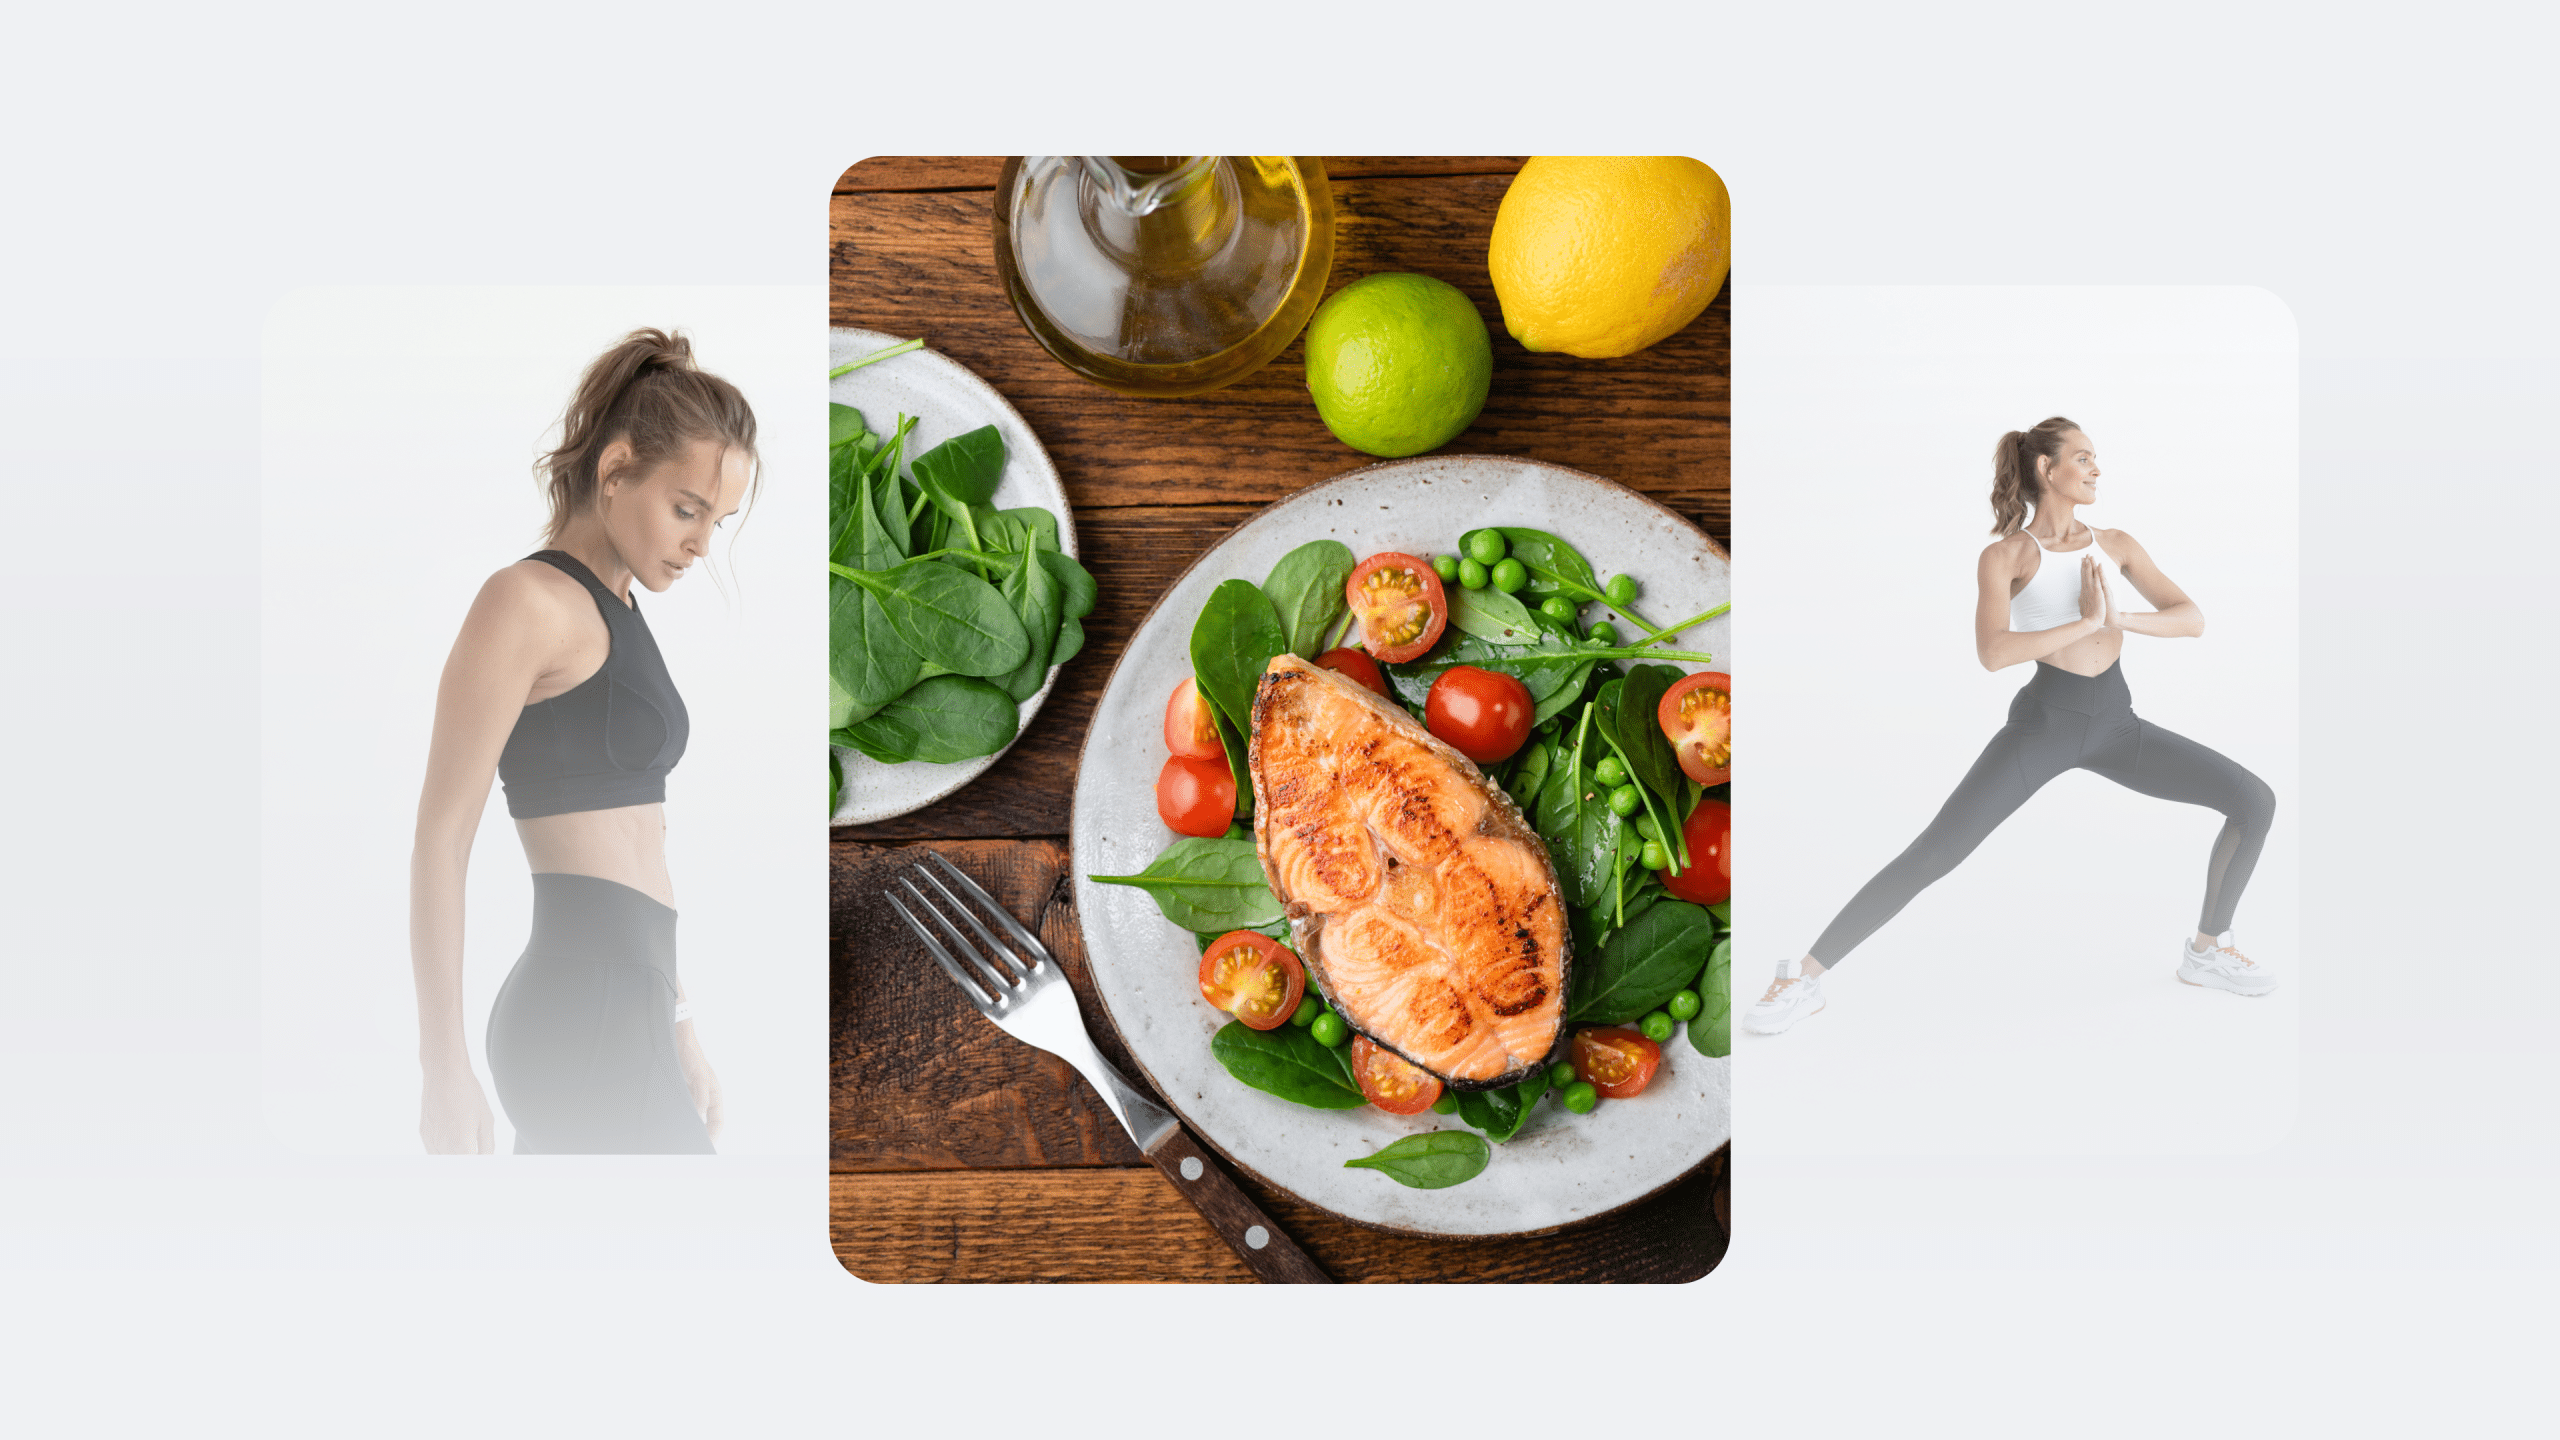 5 Minute Meal Plannning  21 day fix meals, 21 day fix meal plan